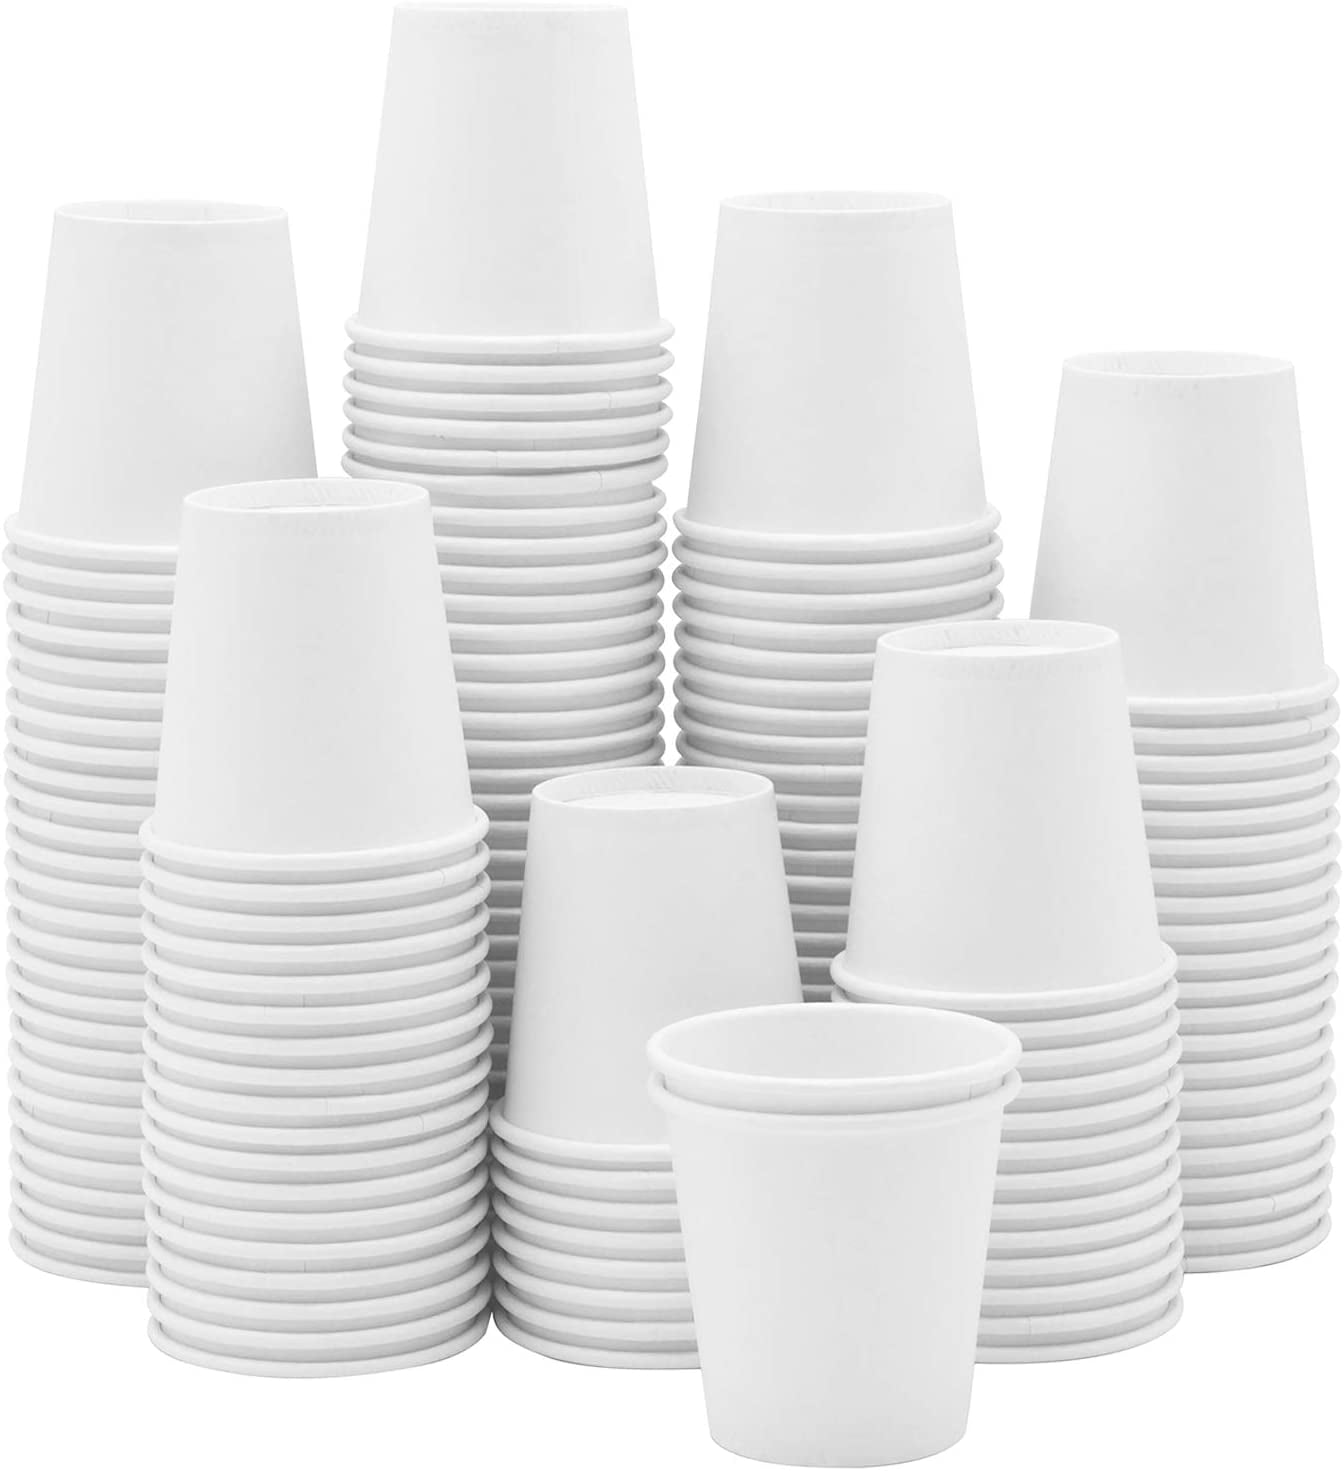 RACETOP [1000 Pack] 8 oz Paper Coffee Cups Disposable, Hot Coffee Cups 8oz, Office Coffee Cups (8 oz 1000 Pack) (White, 1000)